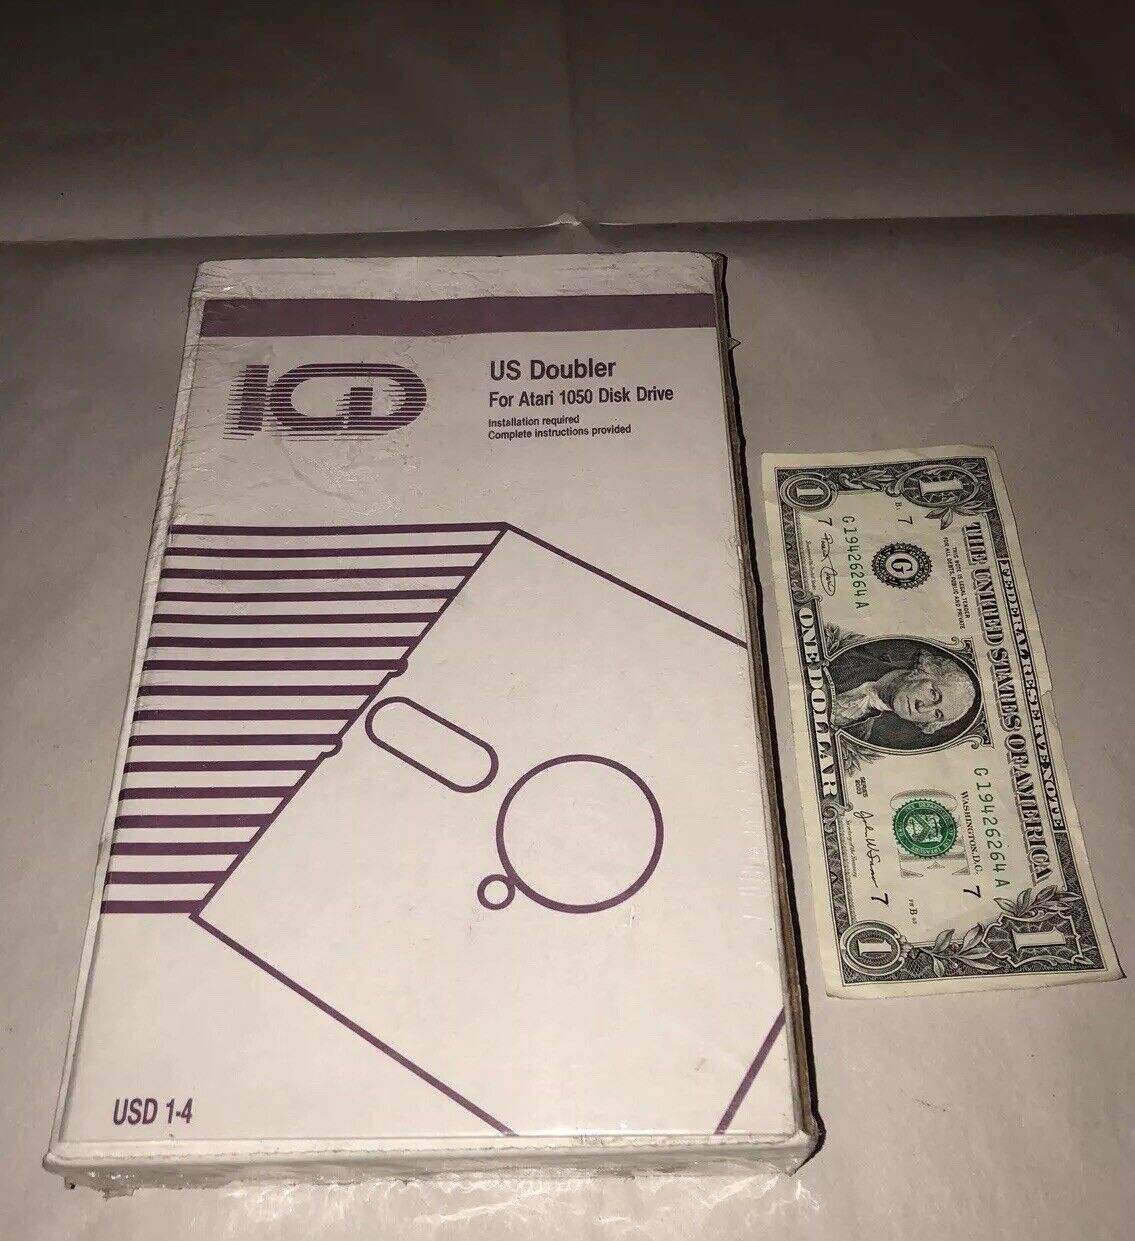 BRAND NEW Sealed Box ICD US Doubler For Atari 1050 Floppy Disk Drive NOS